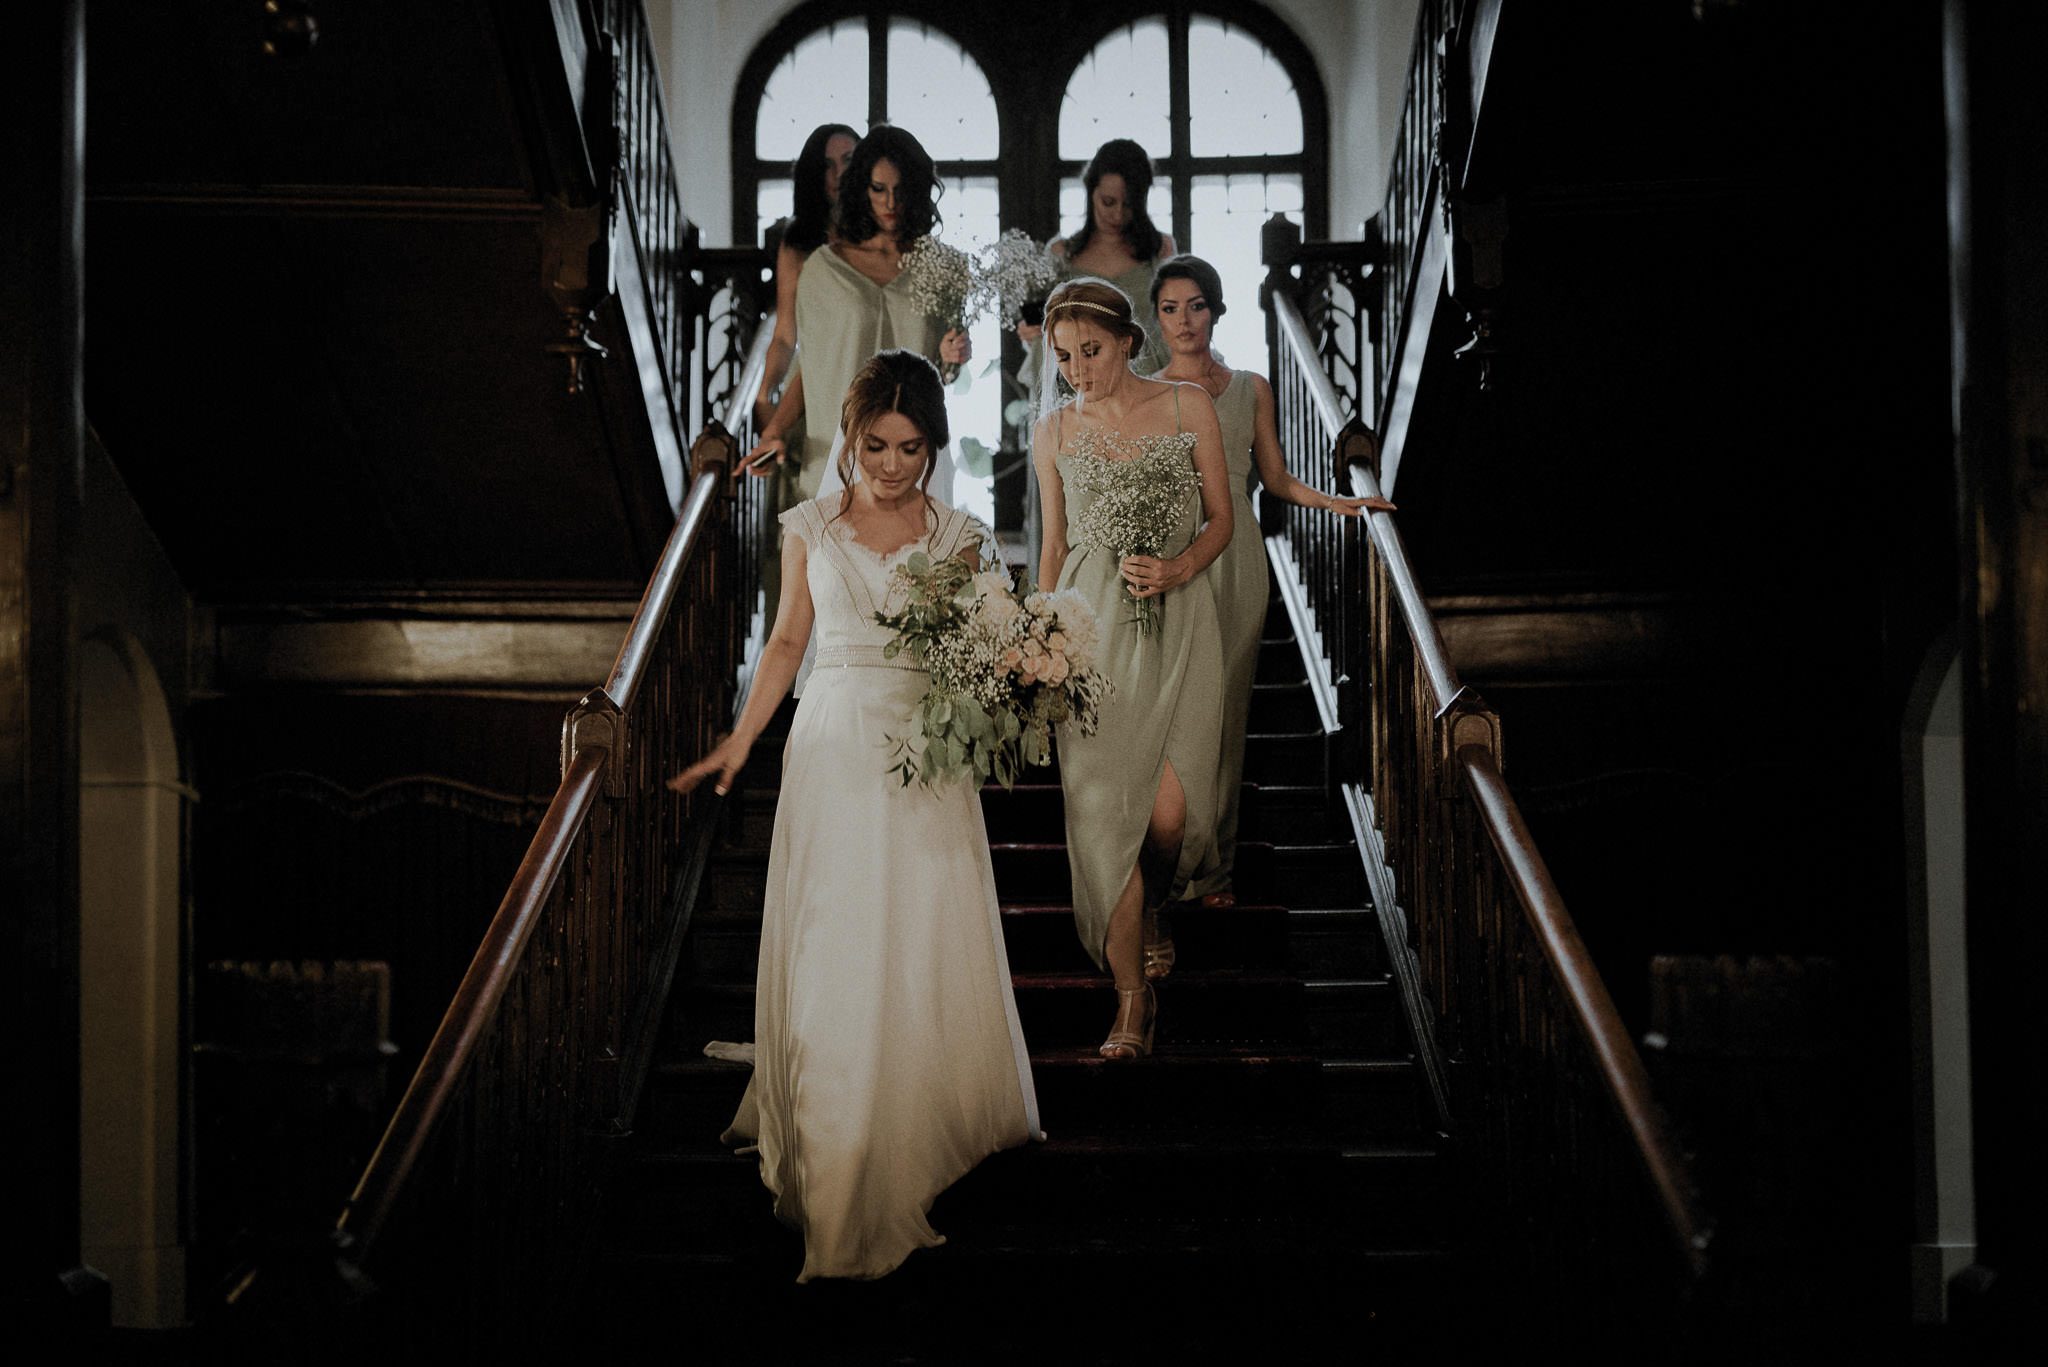 bride and her bridesmaids walking down the stairs towards the ceremony